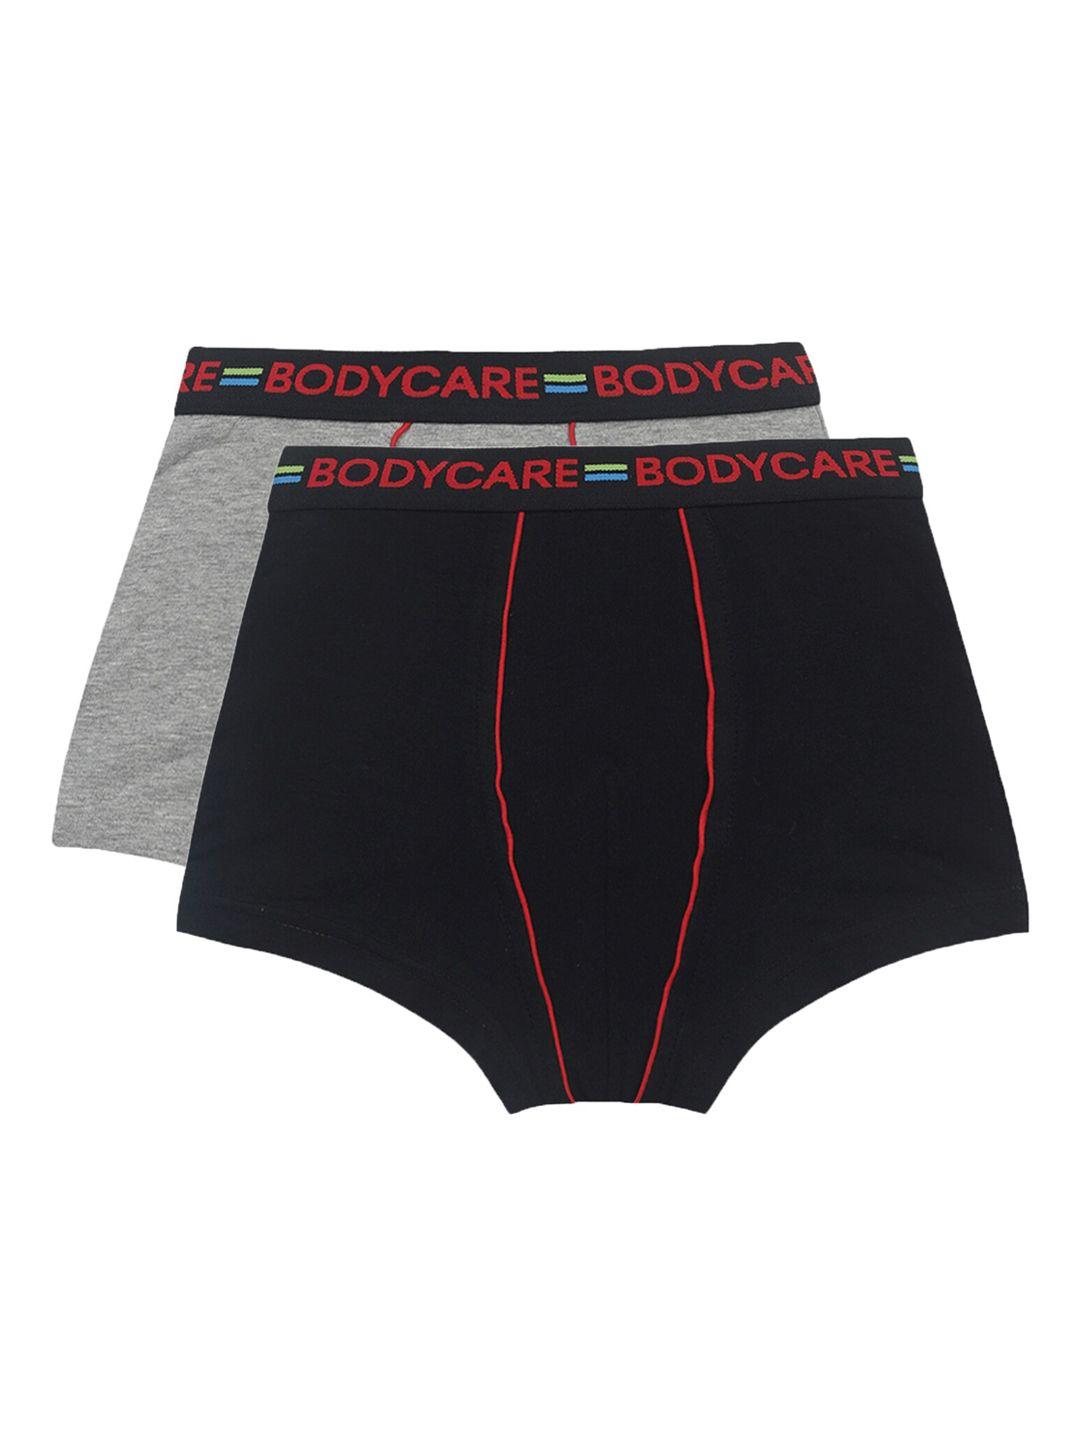 bodycare kids boys pack of 2 assorted cotton trunks kga2053a-60